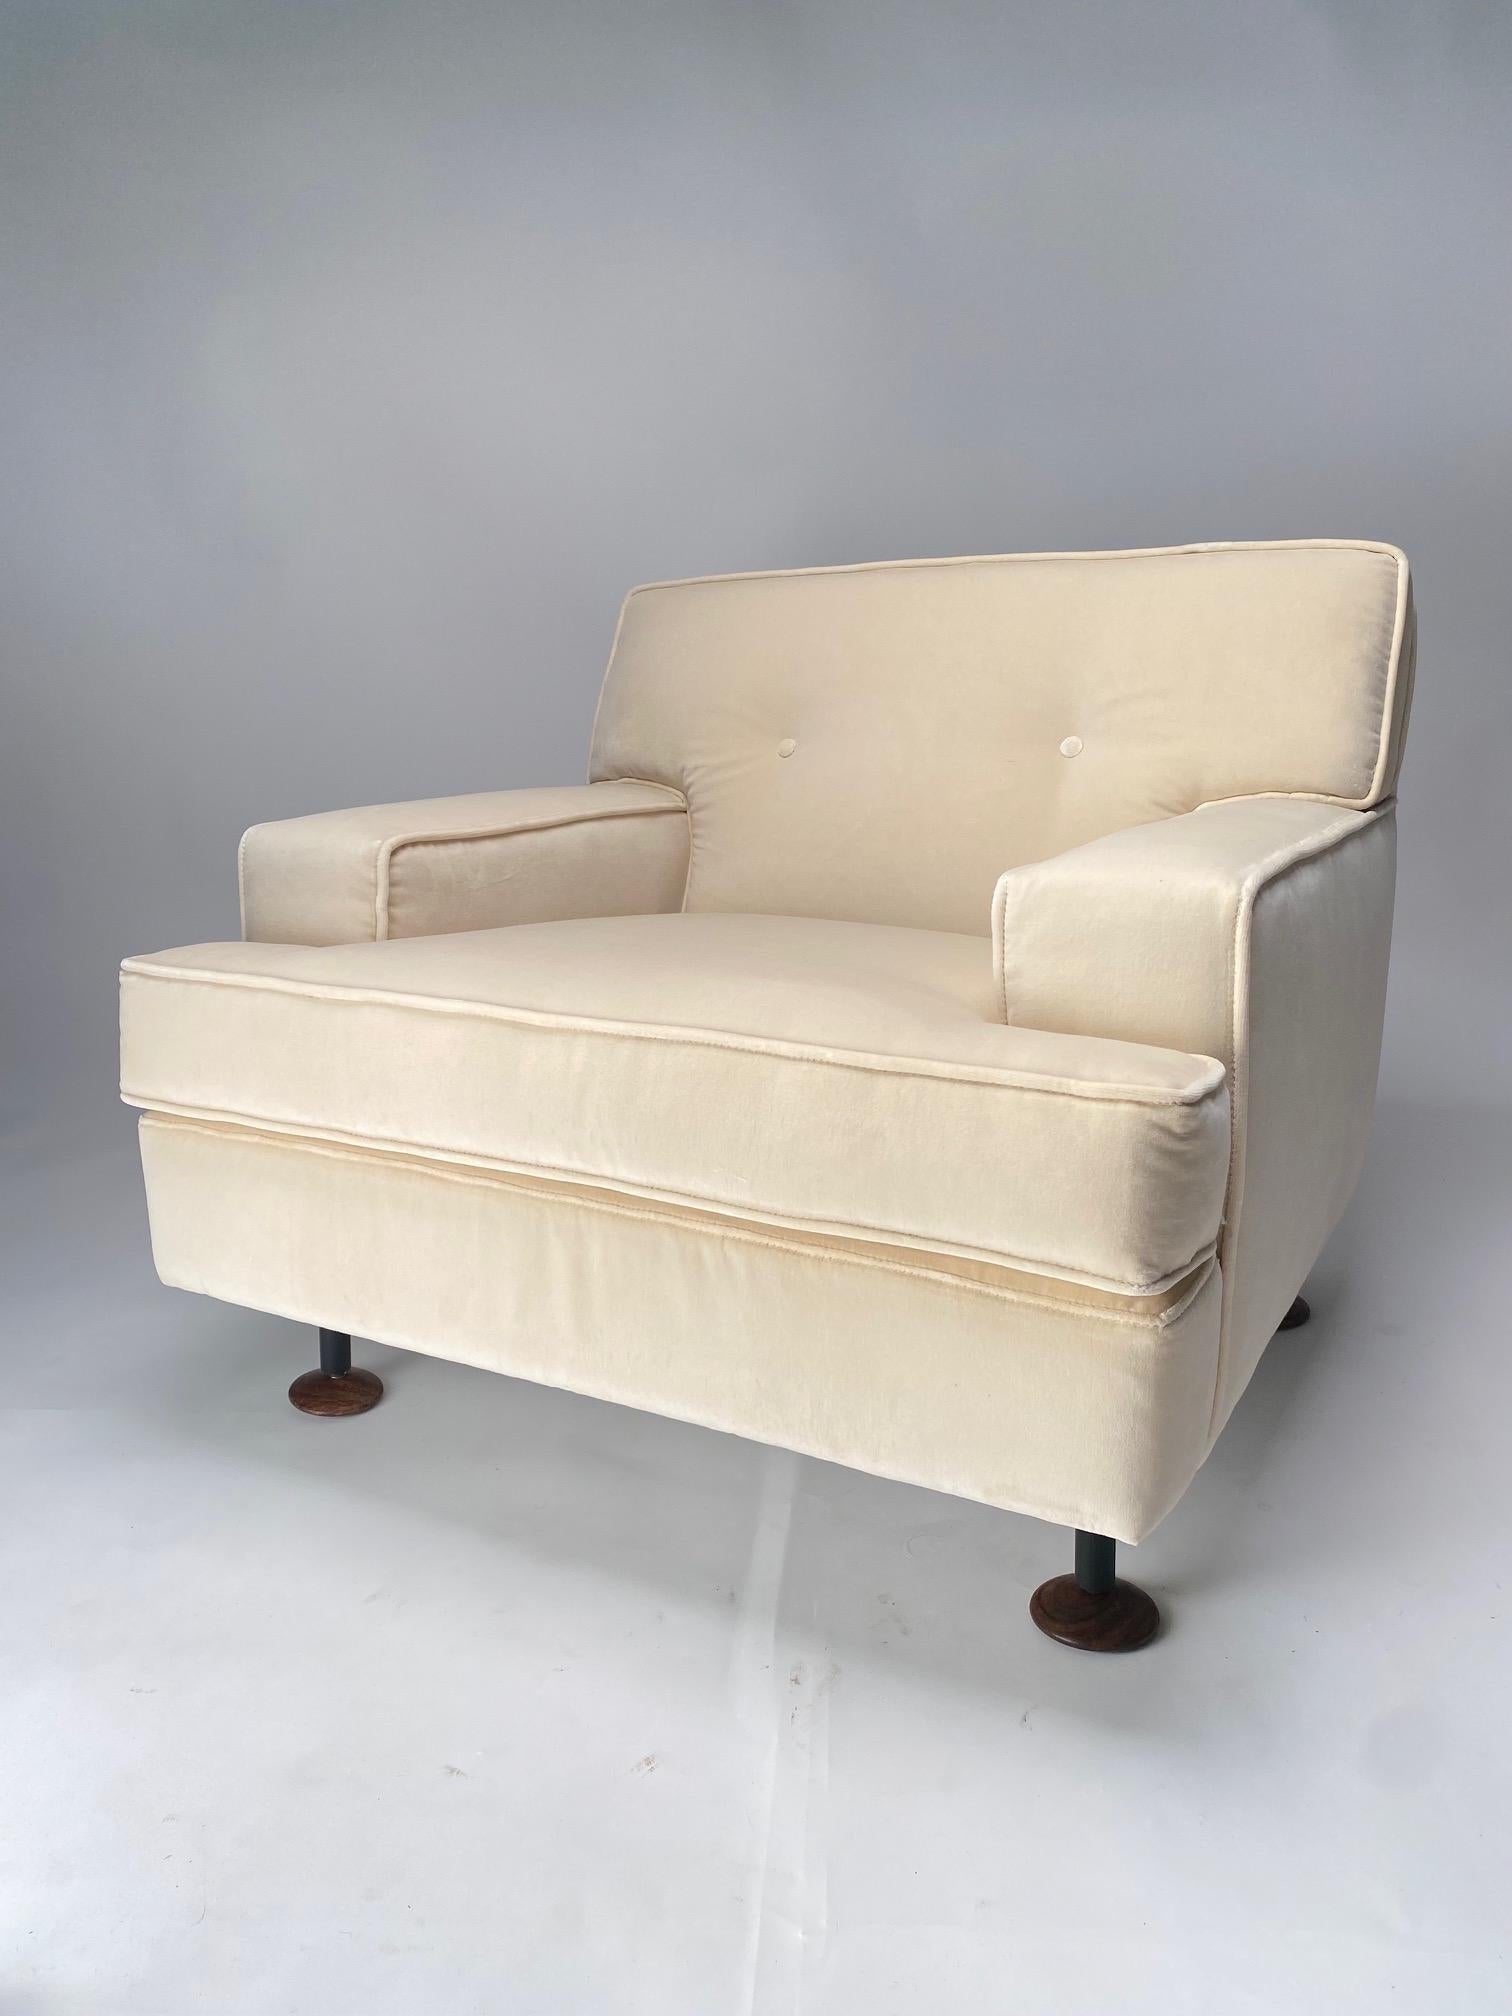 Splendid pair of armchairs designed by the Italian architect and designer Marco Zanuso for Arflex. The chairs are in excellent condition, and have recently been reupholstered in white velvet 

Arfllex production 1962.  Bibliography: Giuliana